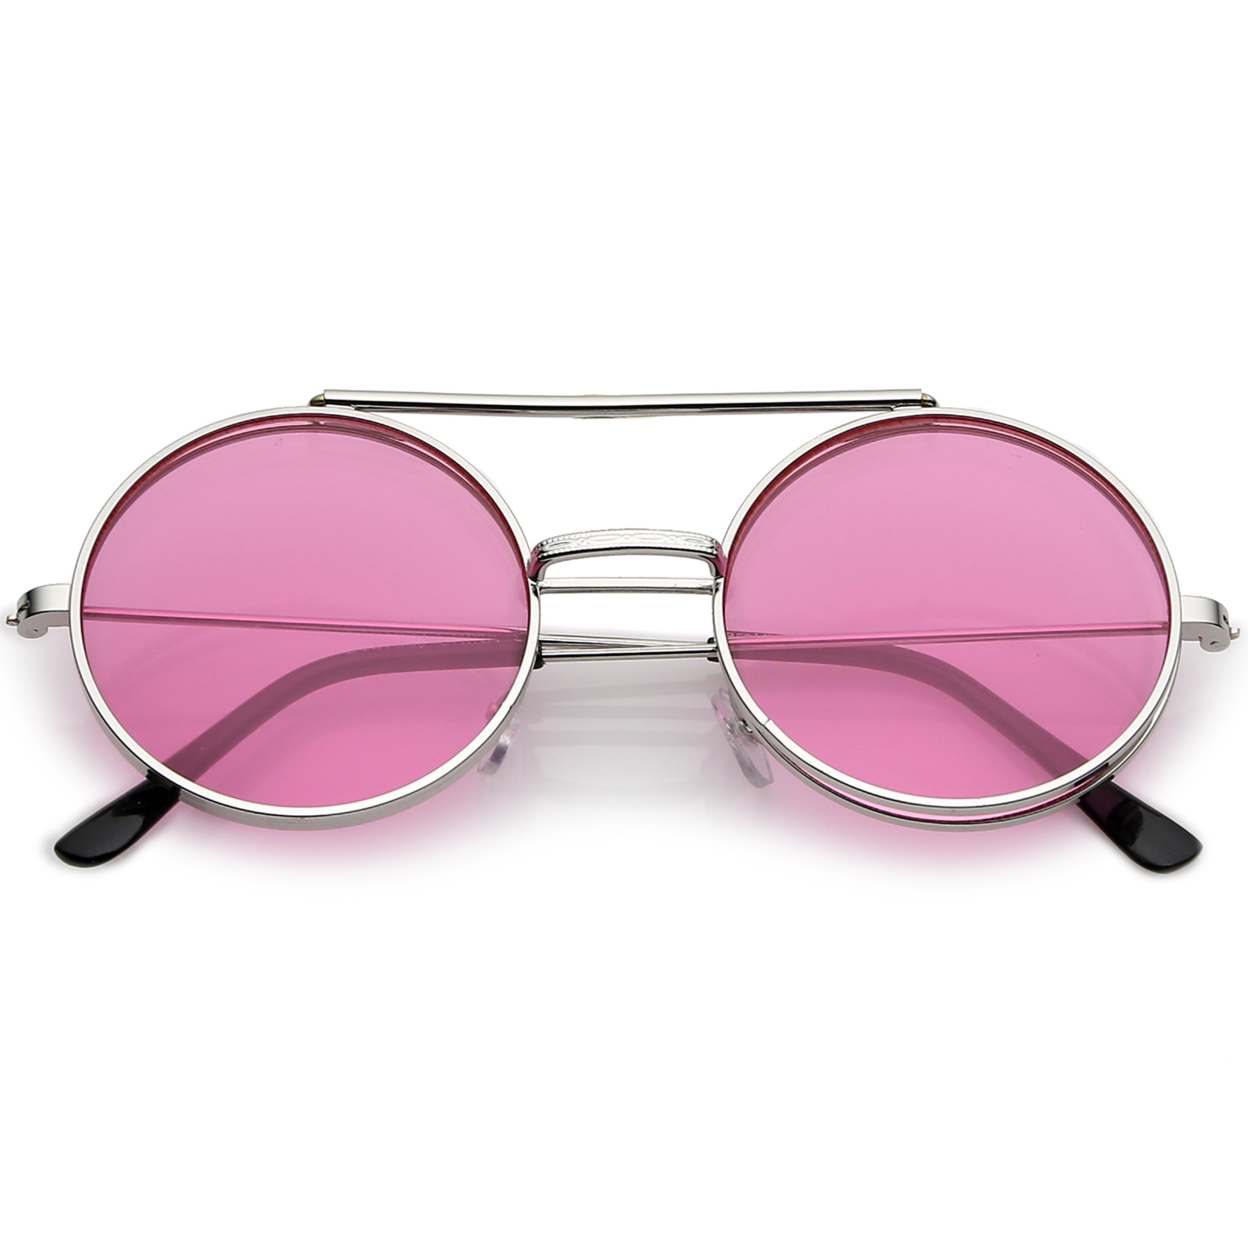 Mid Size Flip-Up Colored Lens Round Django Sunglasses 49mm - Silver / Pink